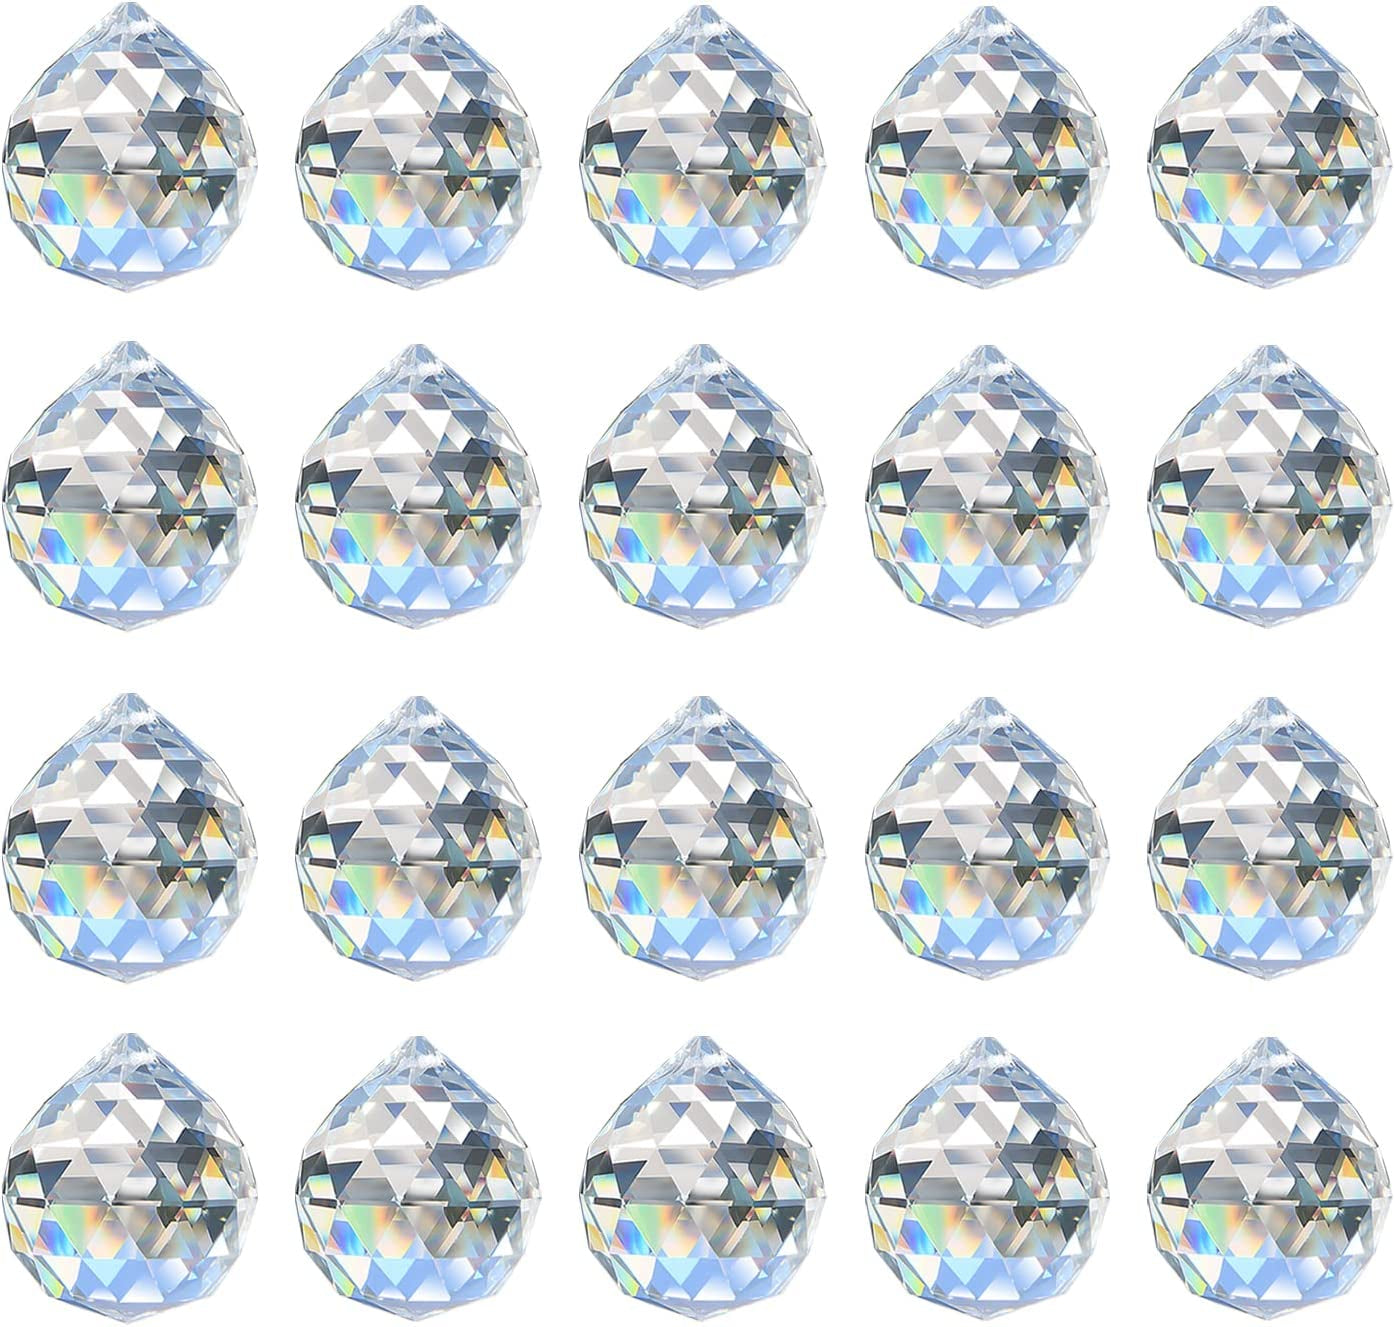 MerryNine, Merrynine 30Mm/1.18" Crystal Ball Prism Suncatcher Rainbow Pendants Maker, Hanging Crystals Prisms for Windows, for Feng Shui, for Gift(20Pack)